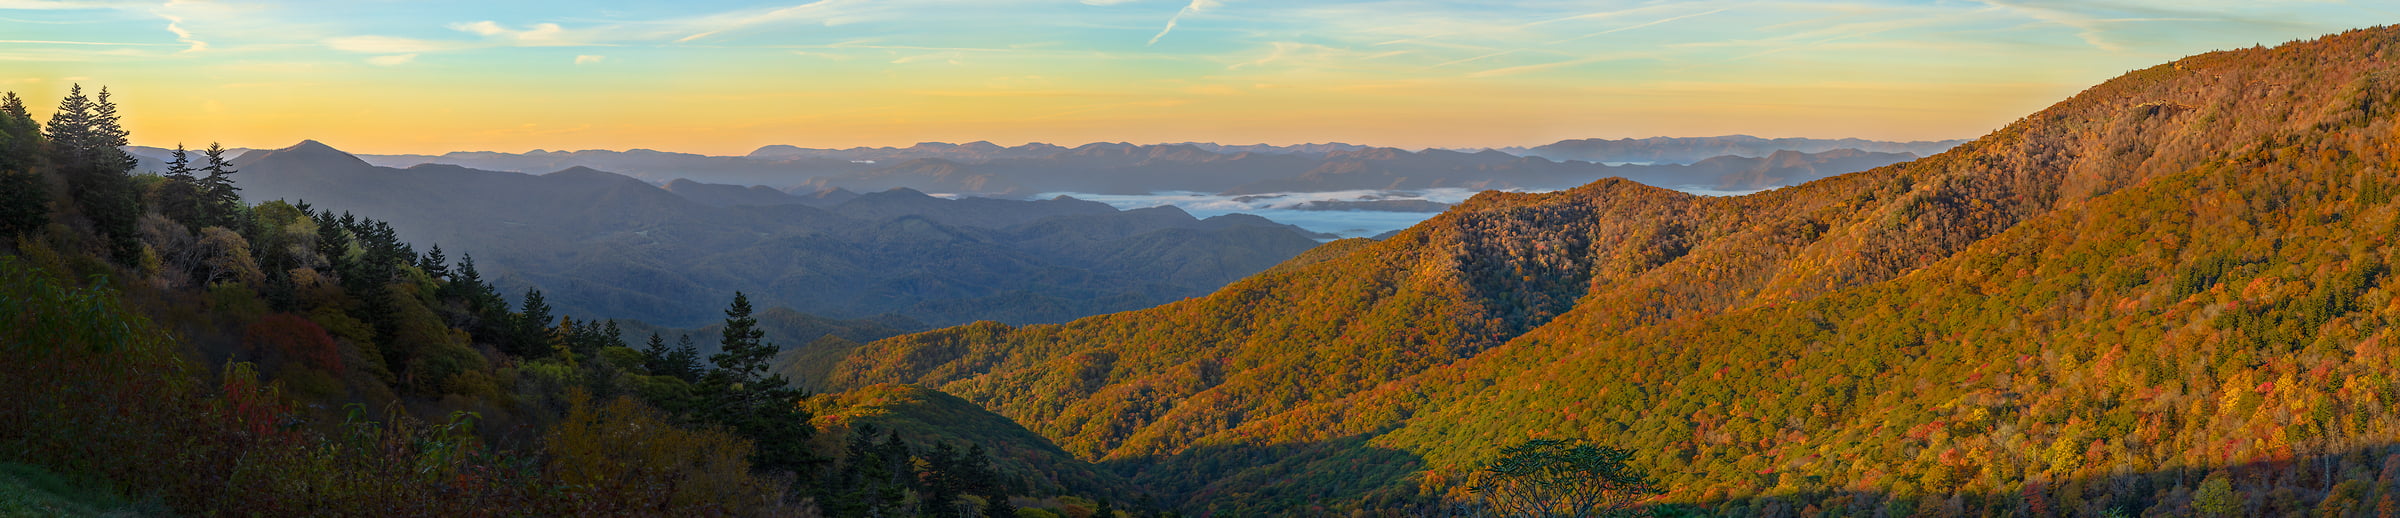 1,150 megapixels! A very high resolution landscape photo of the Blue Ridge Mountains; photograph created by John Freeman in Mile Post 450.2, Blue Ridge Parkway, North Carolina.